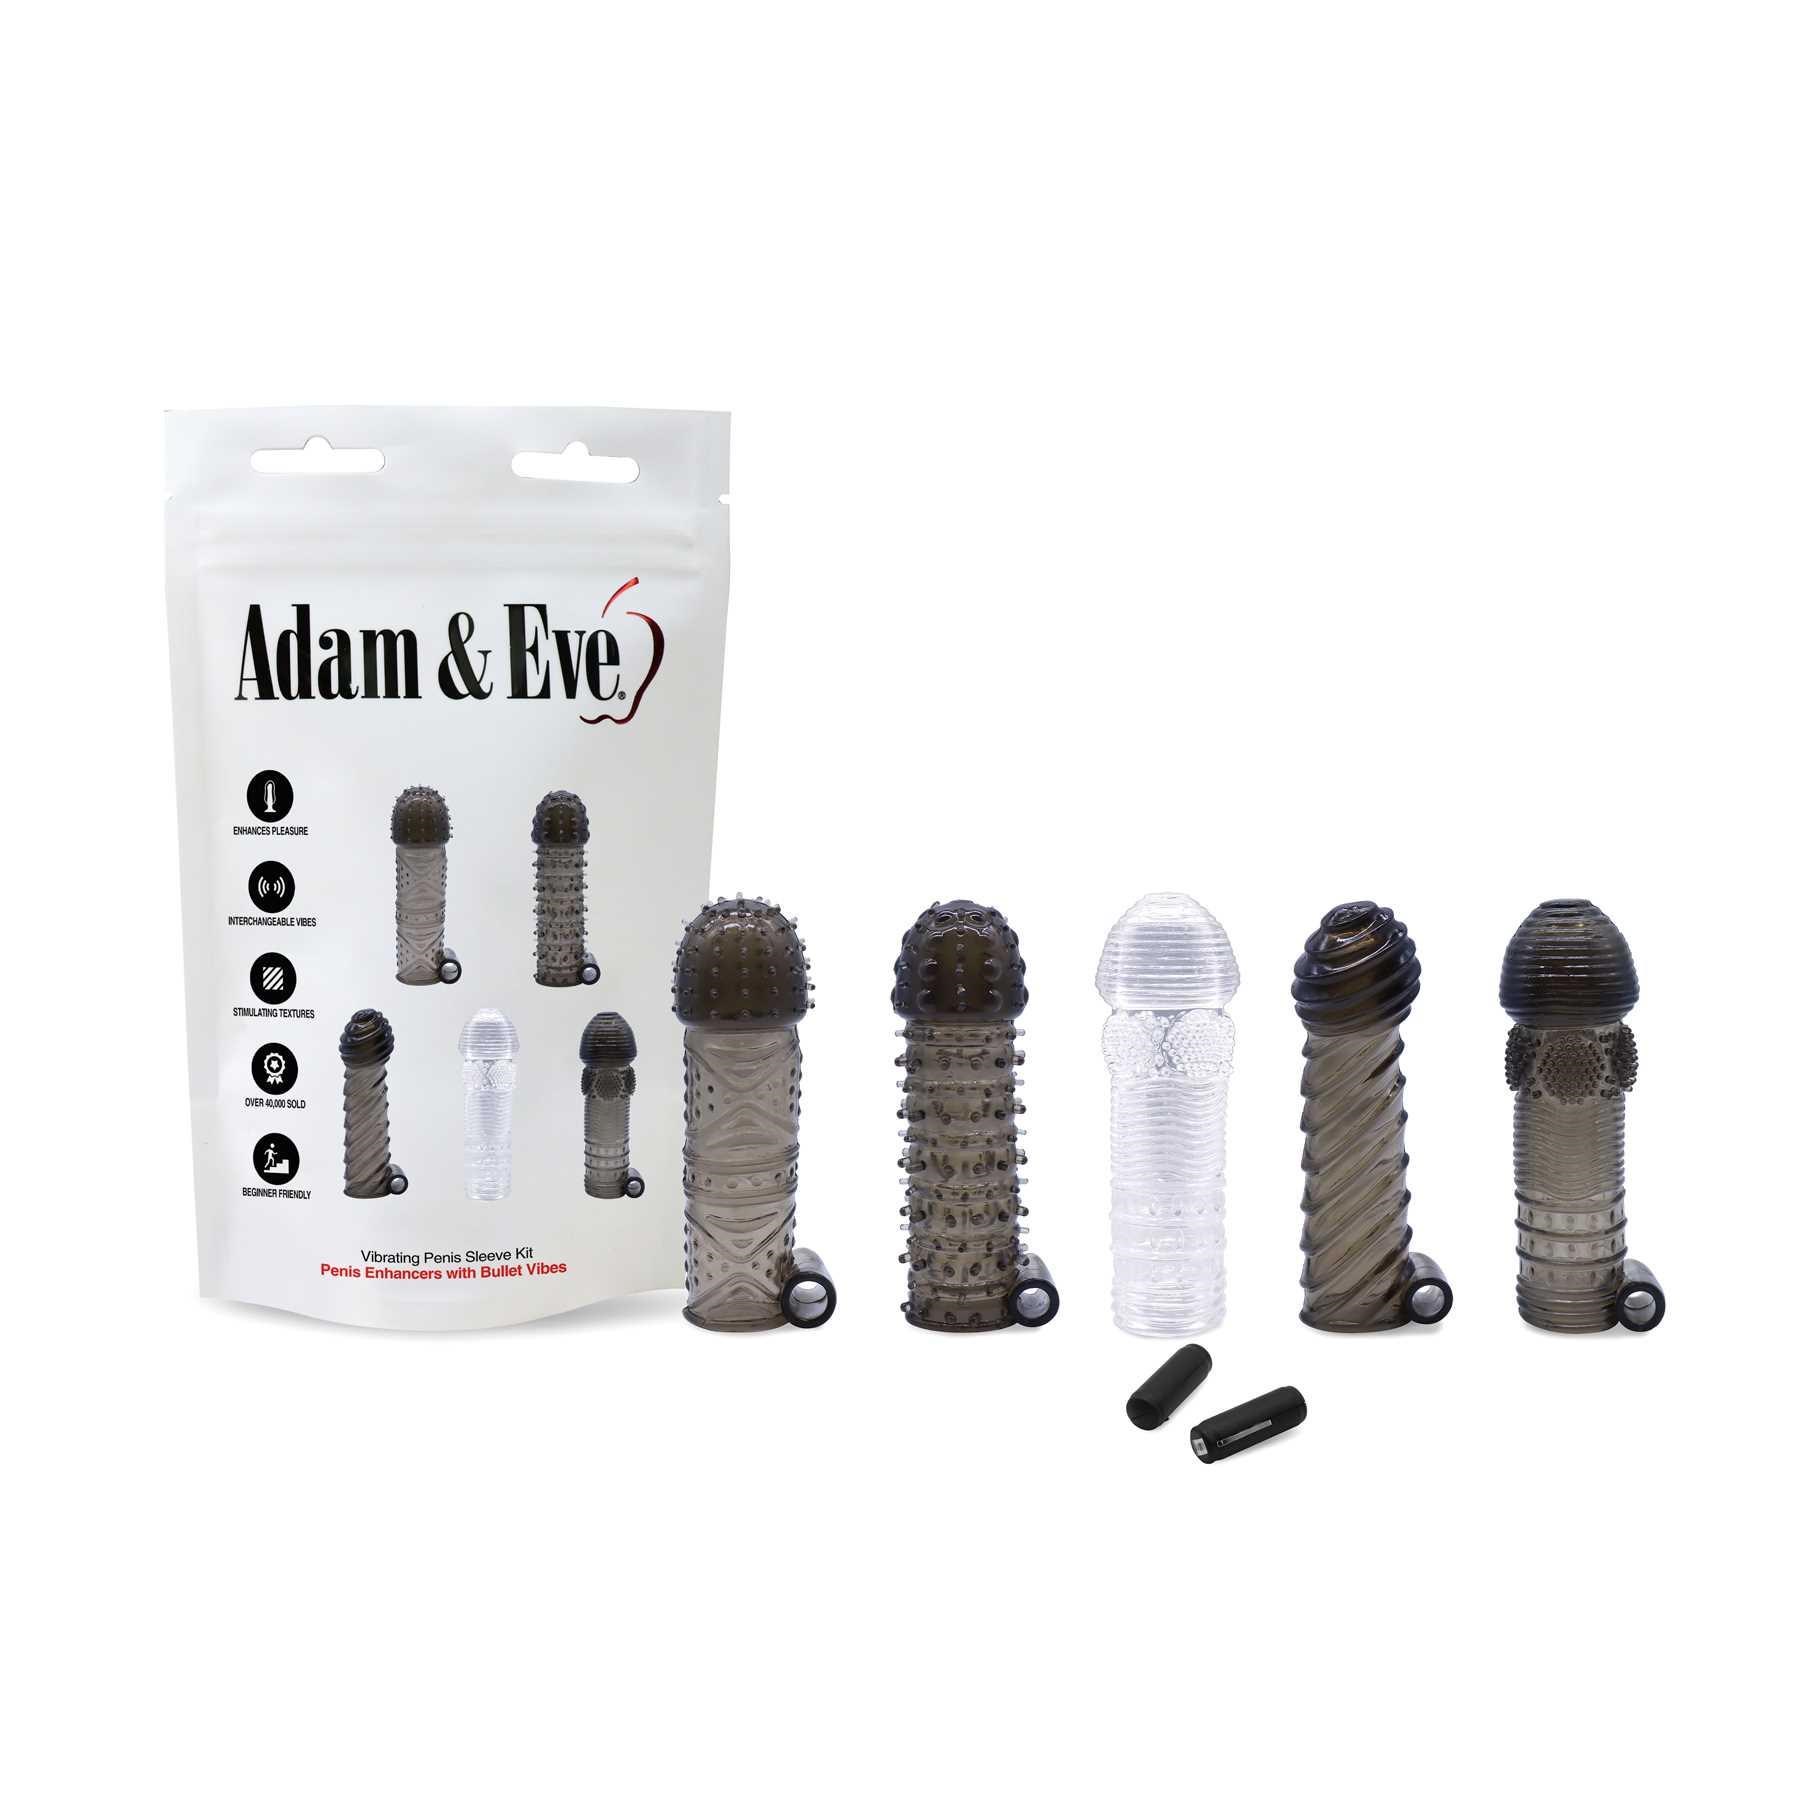 ADAM AND EVE VIBRATING PENIS SLEEVE KIT with front of box